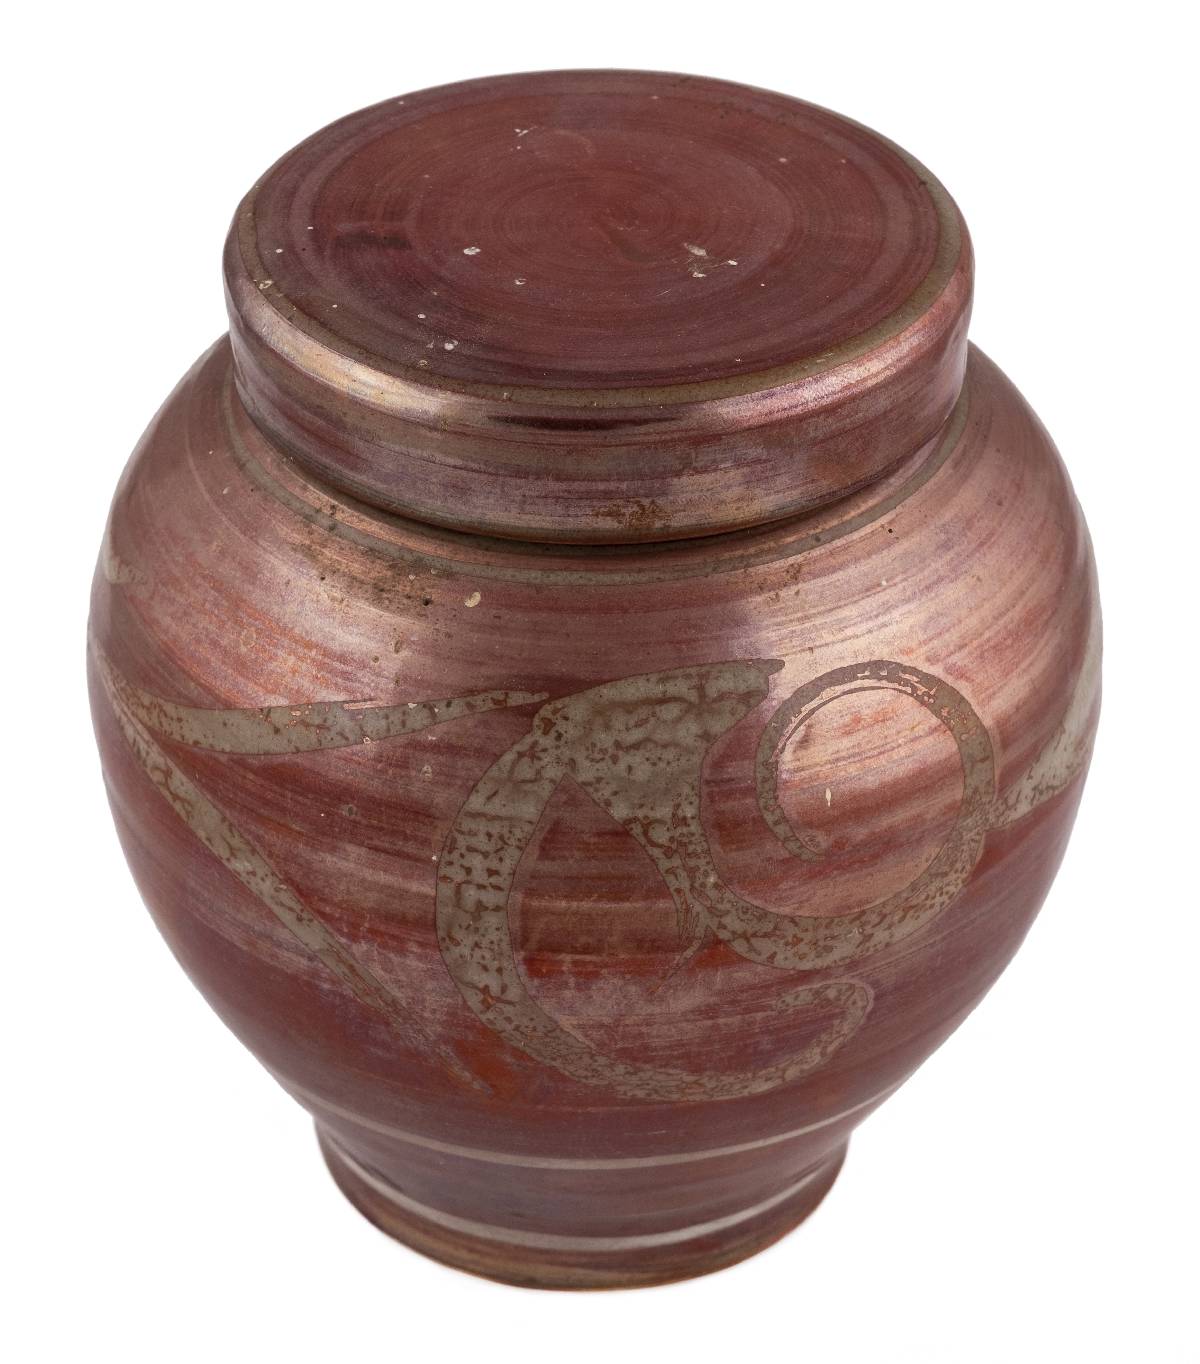 *Caiger-Smith (Alan, 1930-). Aldermaston Pottery red lustre ginger jar and cover, with stylised